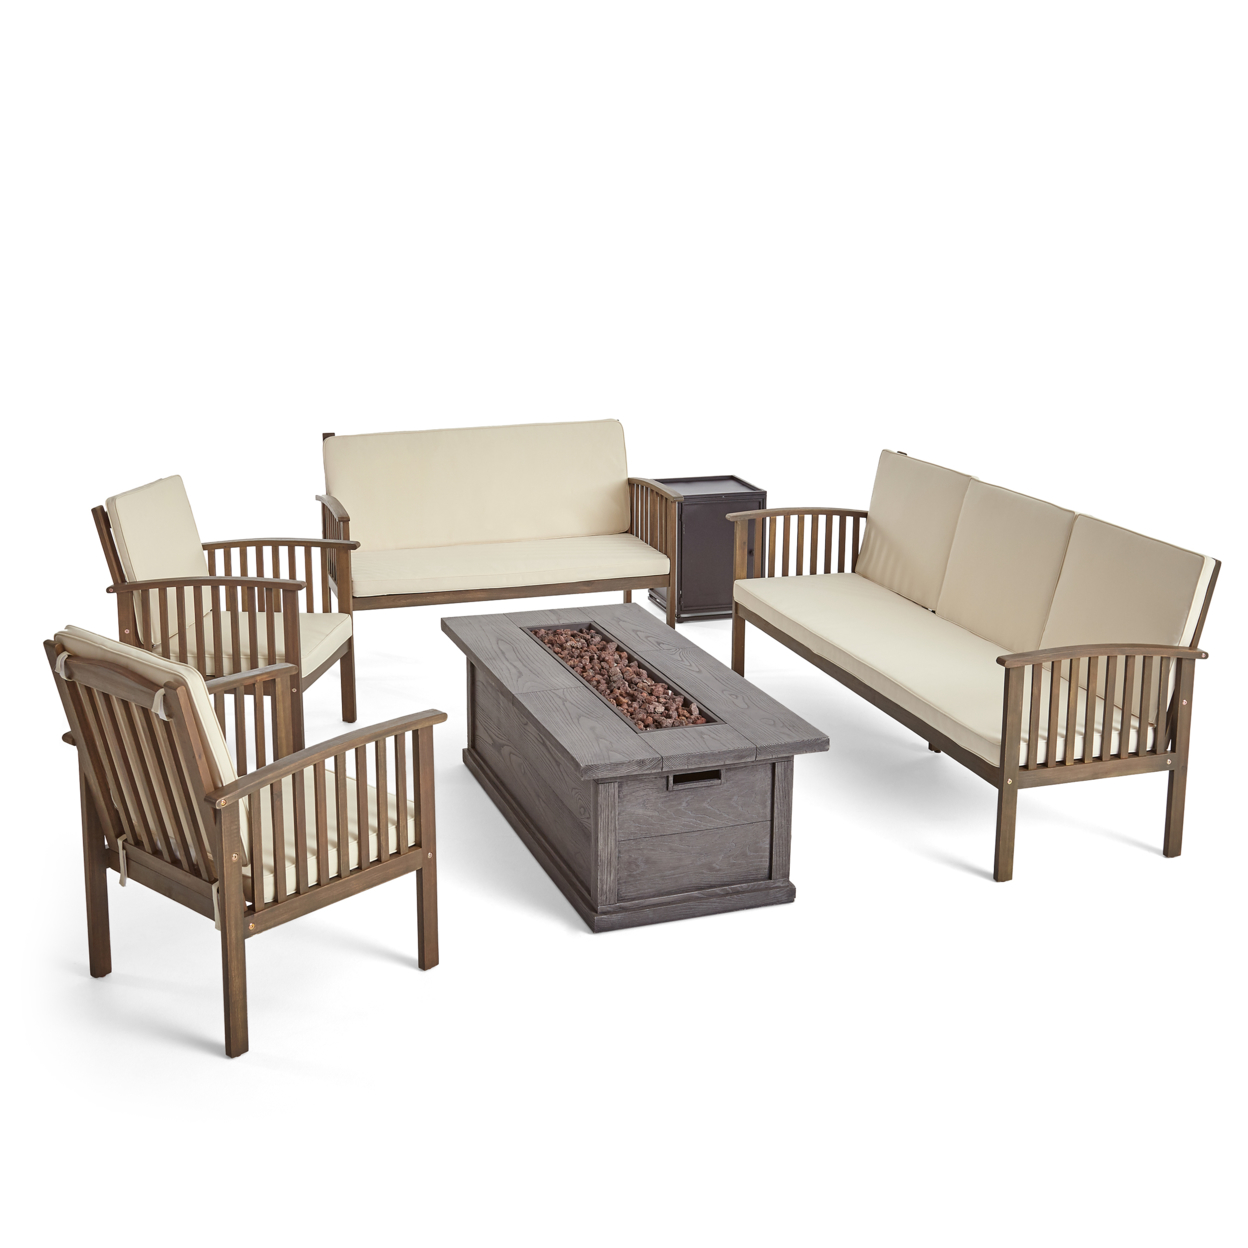 Jean Outdoor 6 Piece Acacia Wood Sofa And Loveseat Conversational Set With Fire Pit - Gray Finish + Cream + Gray